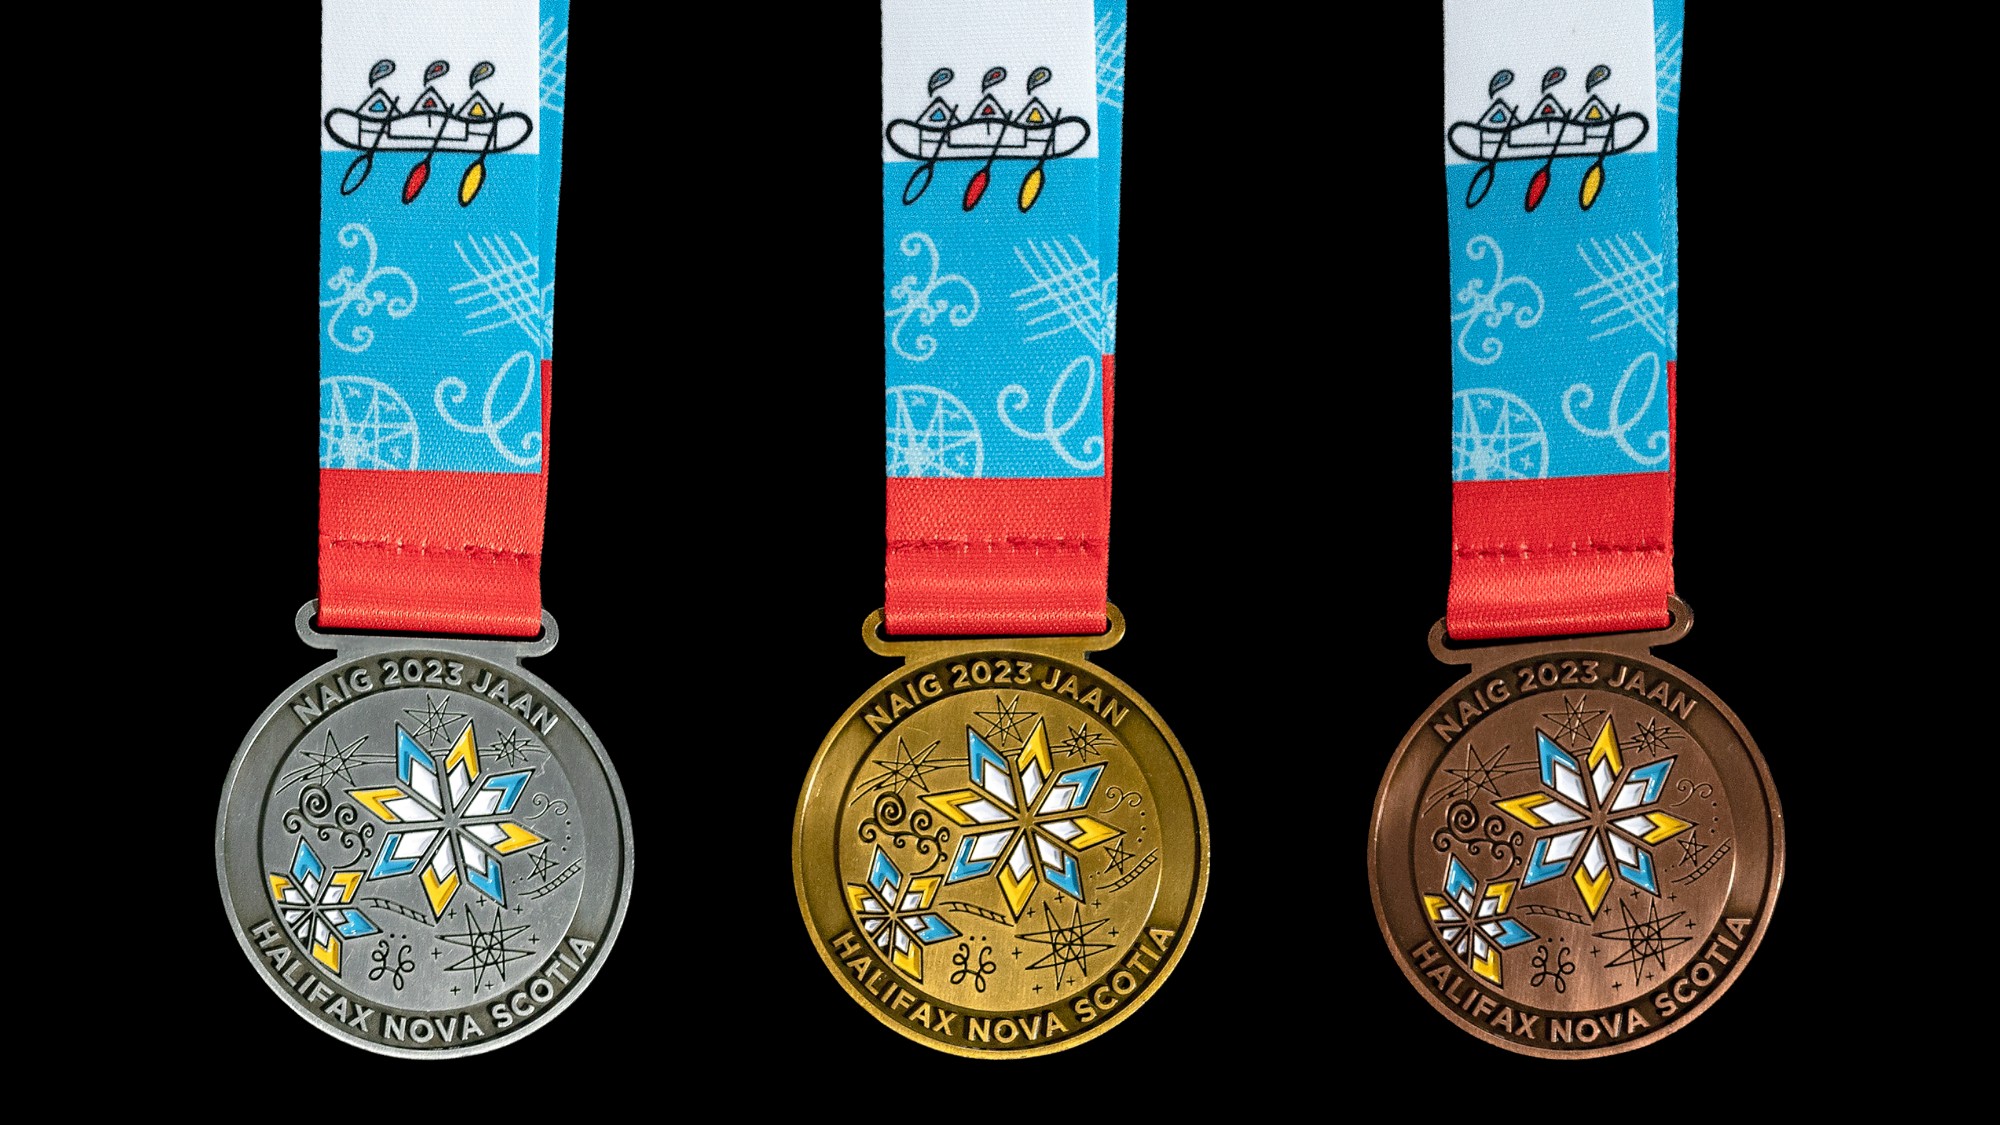 Gold, silver and bronze medals designed by Ella Scothorn and Tayla Fern Paul were revealed at a  media conference on Tuesday at Millbrook First Nation. This event marked the six-month countdown to the 2023 North American Indigenous Games in July. Photo: NAIG 